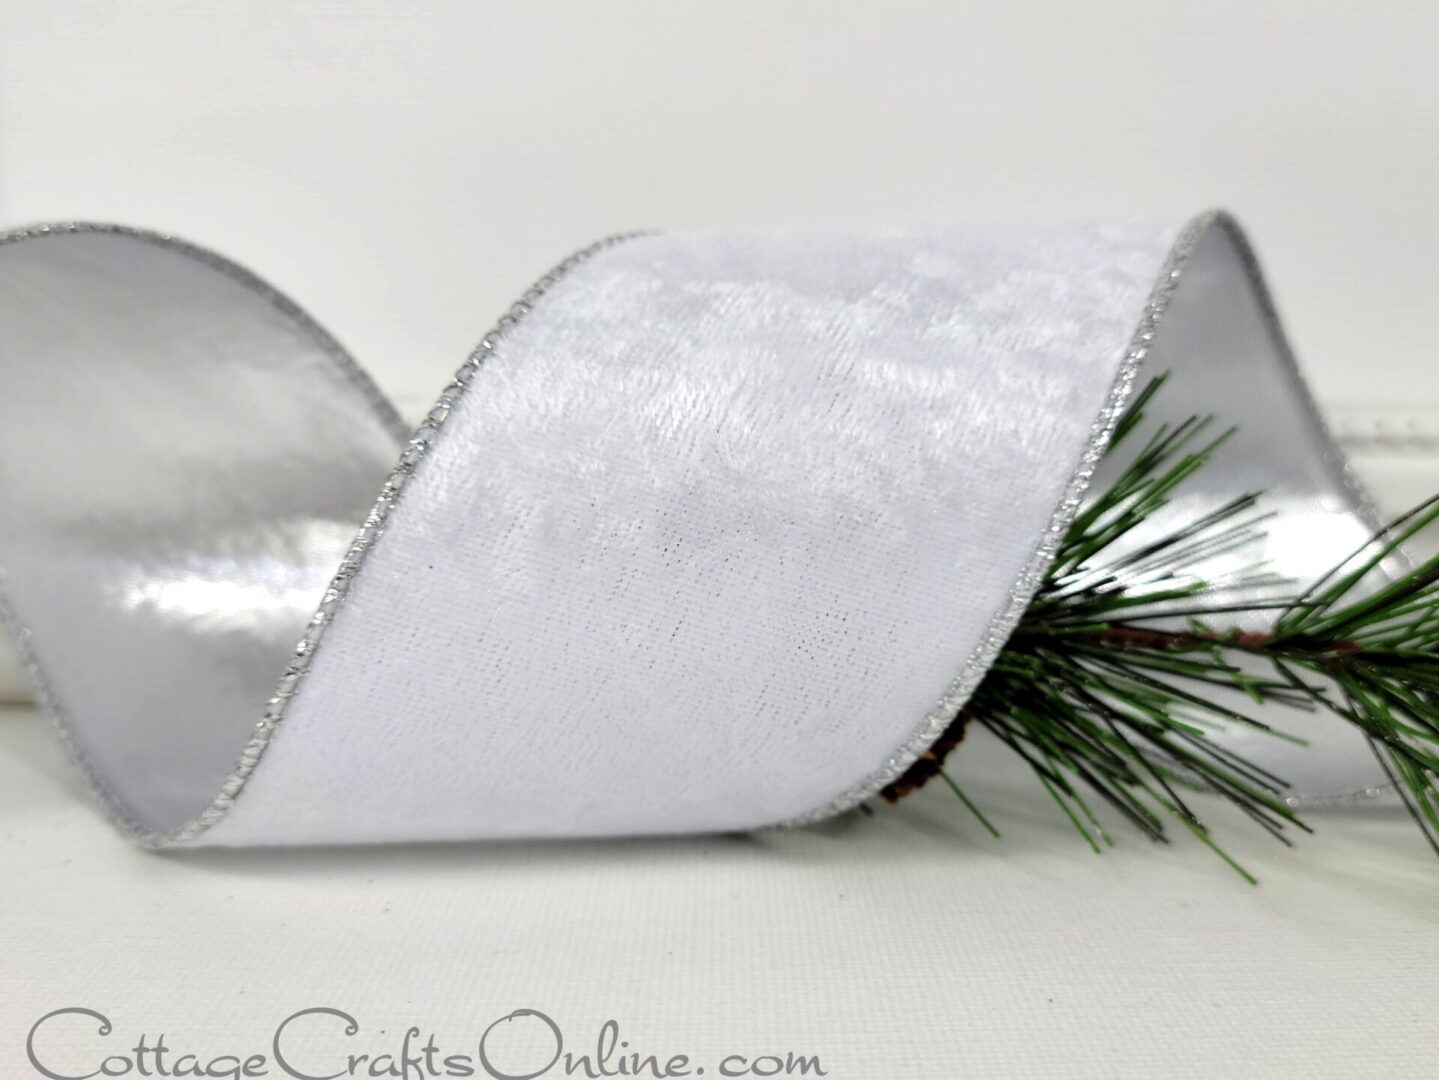 Pearly white velvet with silver back 2.5" wide wired ribbon from the Etsy shop of Cottage Crafts Online.